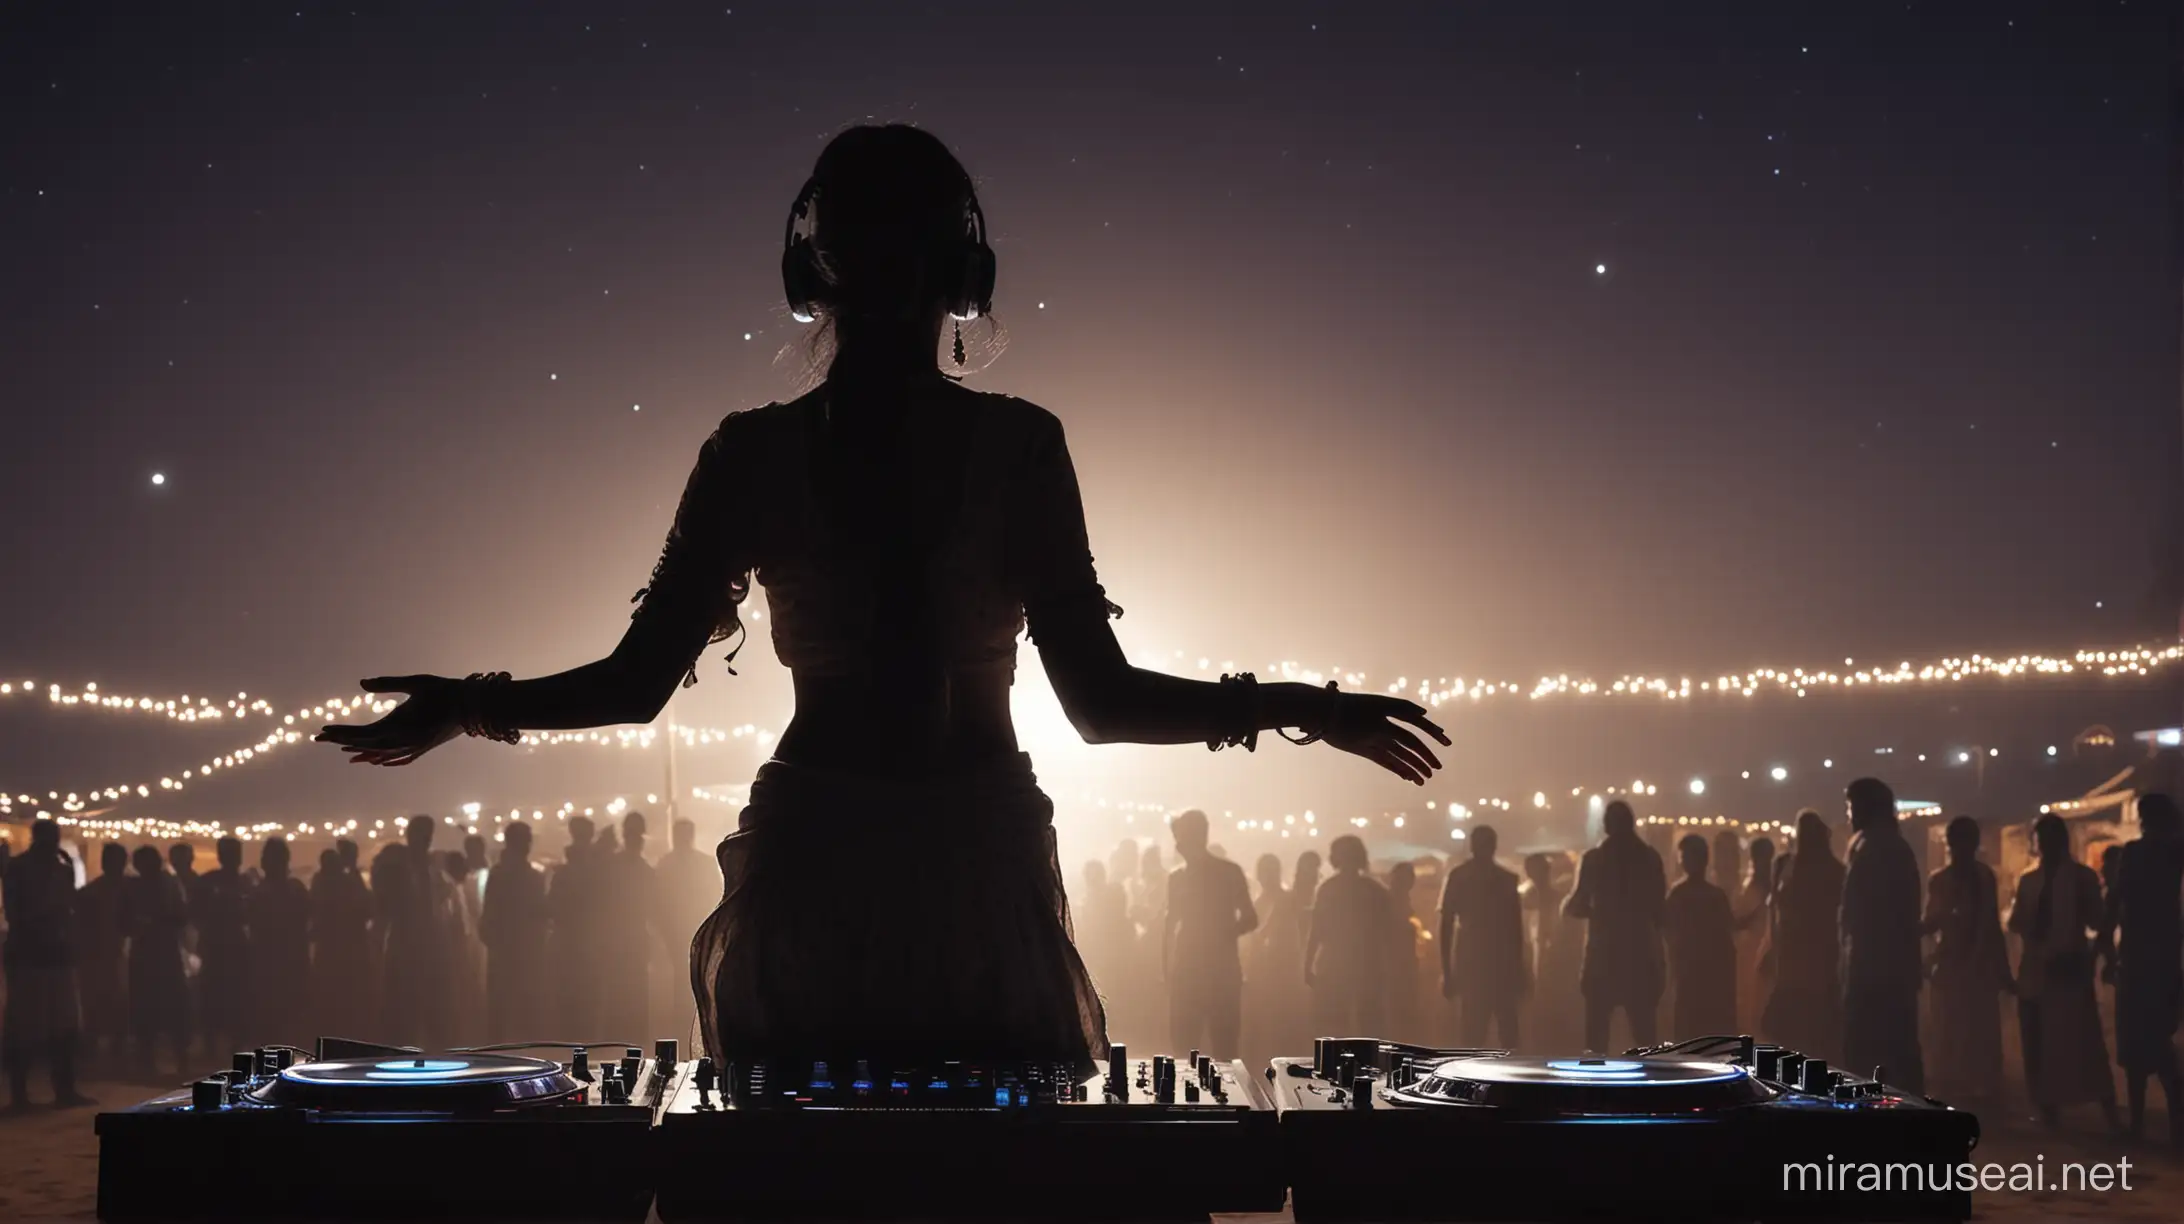 silhouette image of indian village girl dance on DJ, long shot, India village peoples in background, night view, hyper detailed, shot from behind